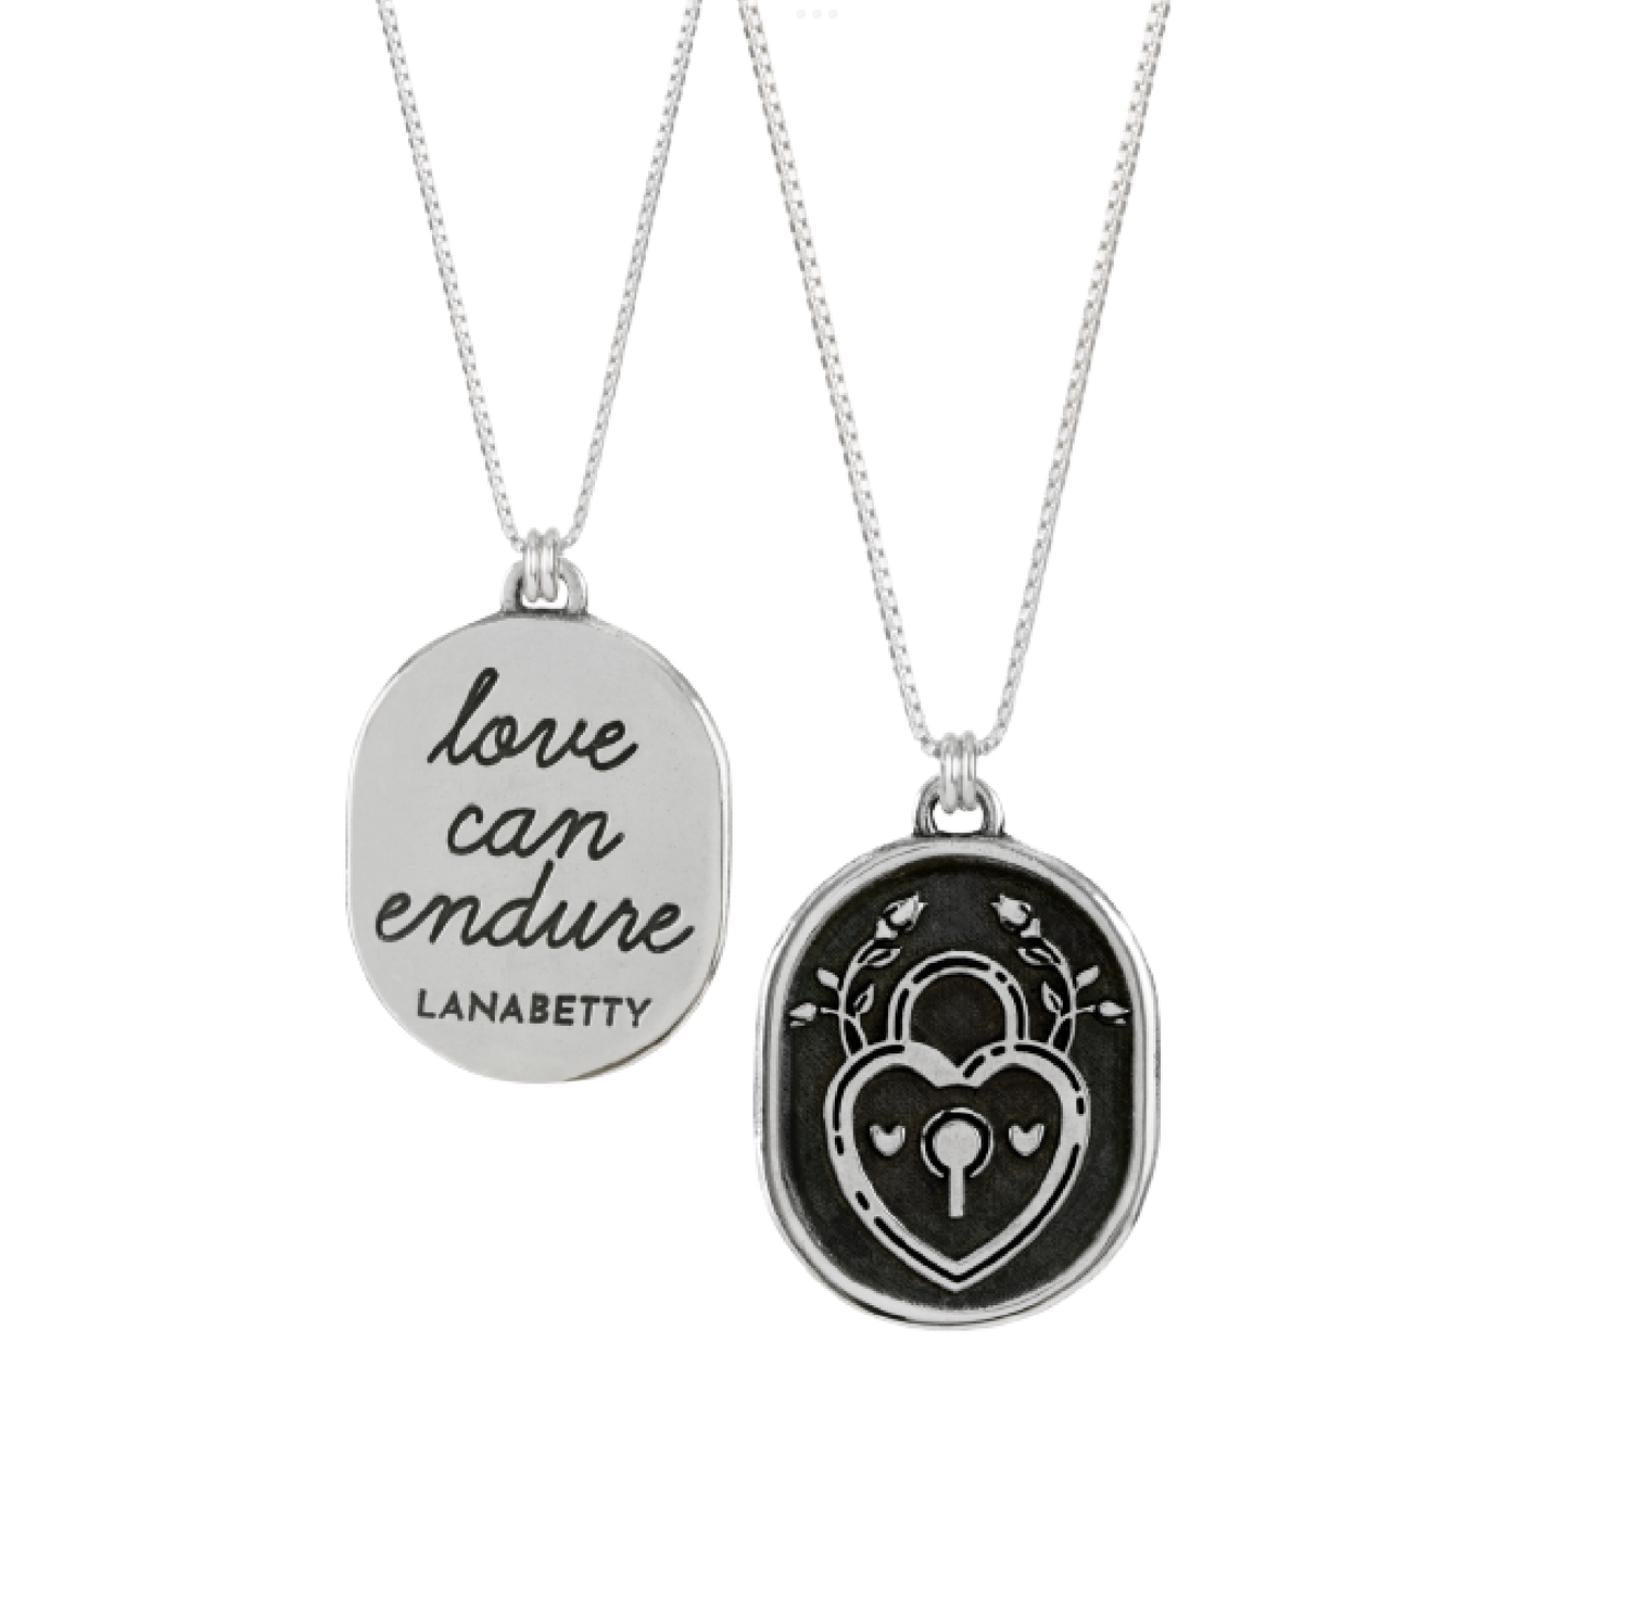 Love Can Endure Sterling Silver Mantra Necklace with 20” chain by Lanabetty